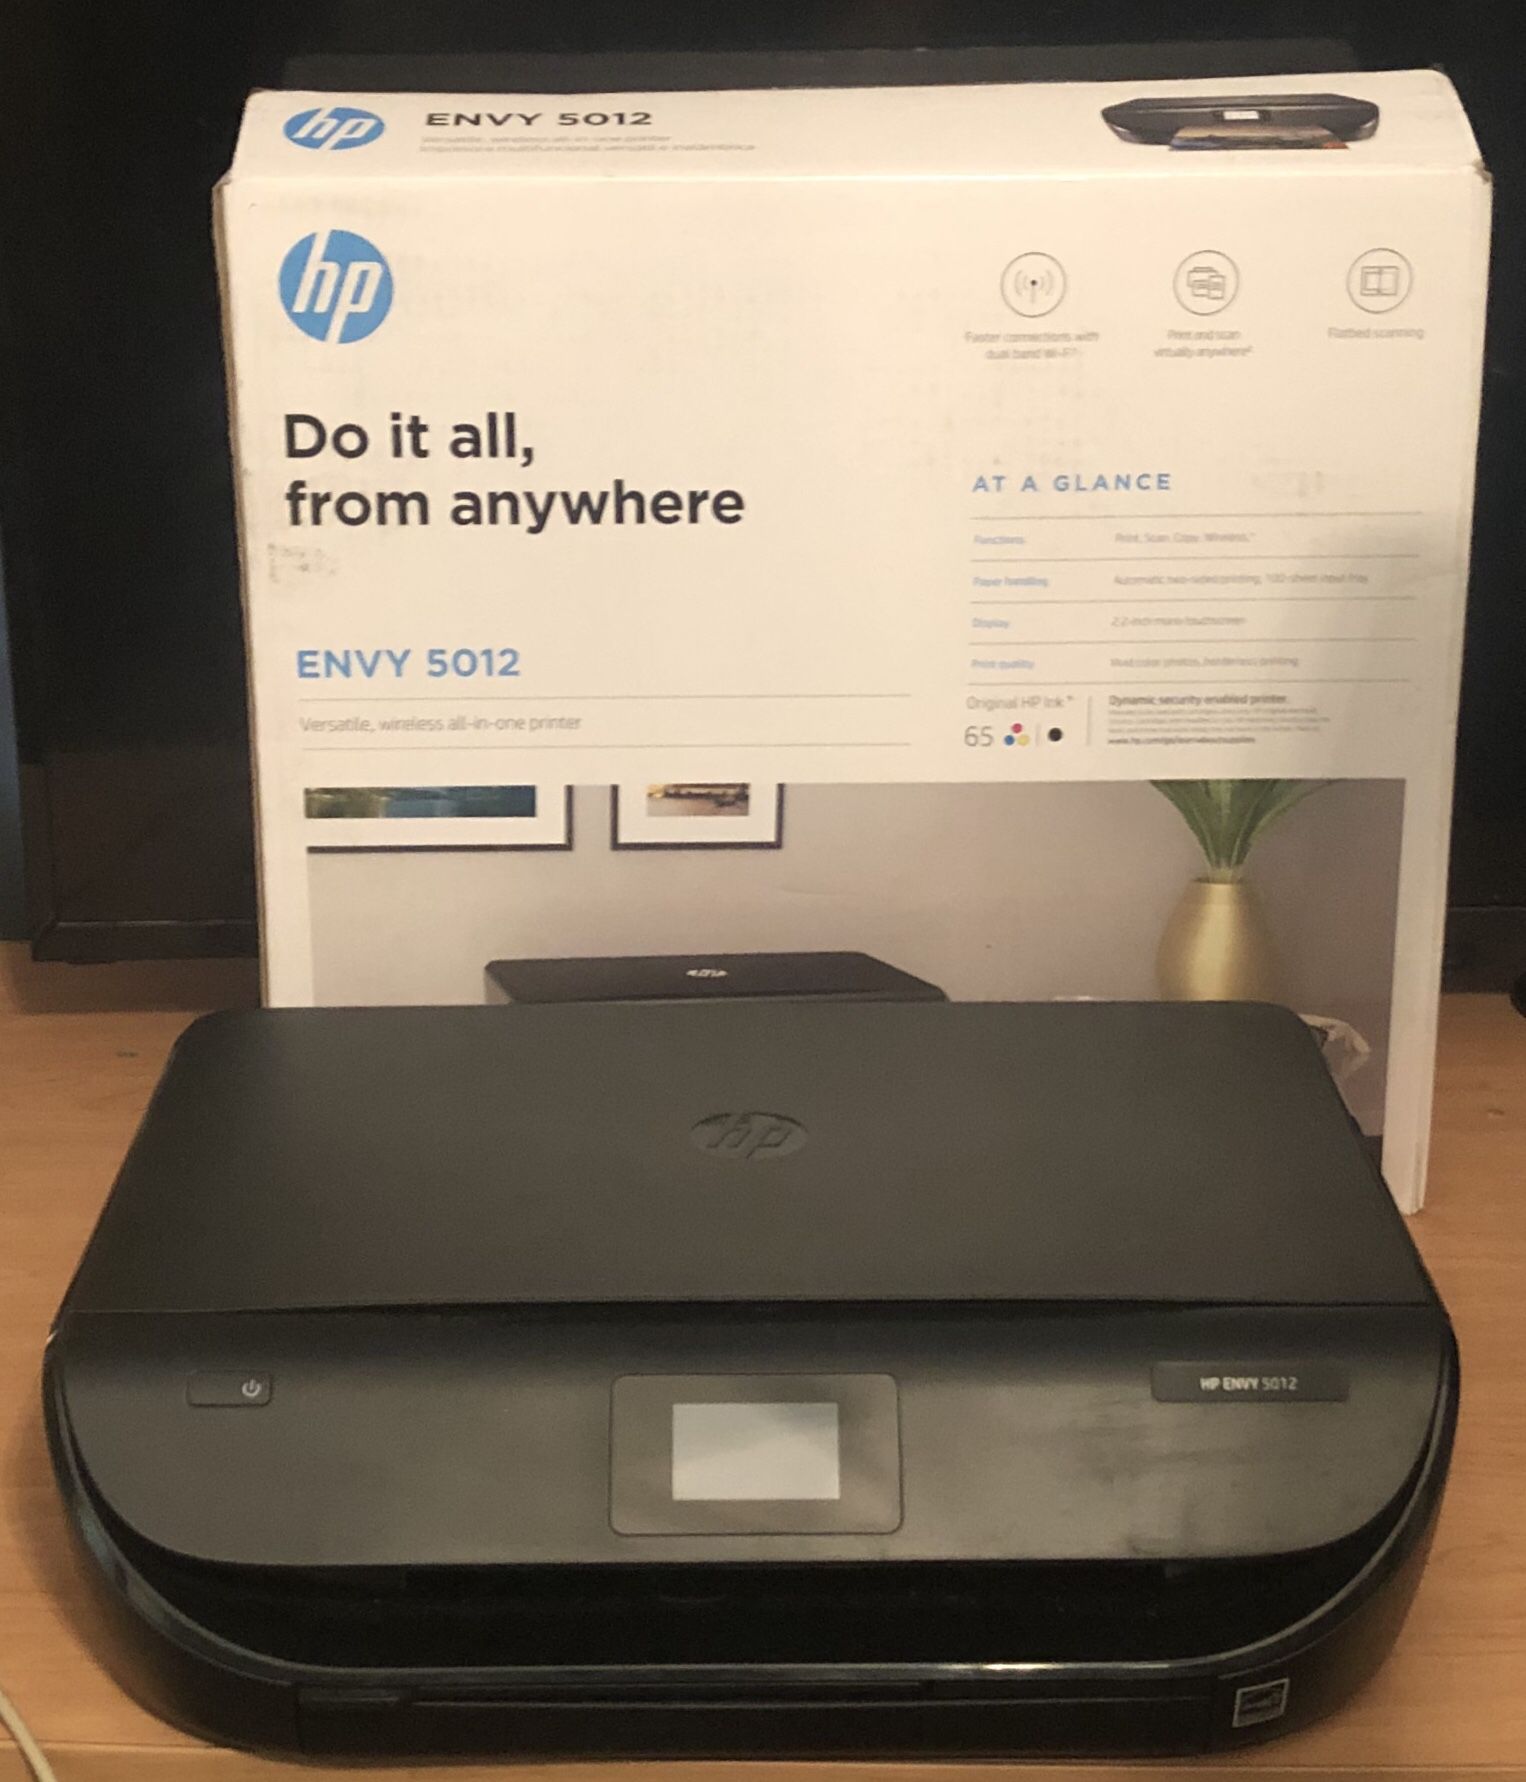 HP All-in-one Printer (Envy 5012)